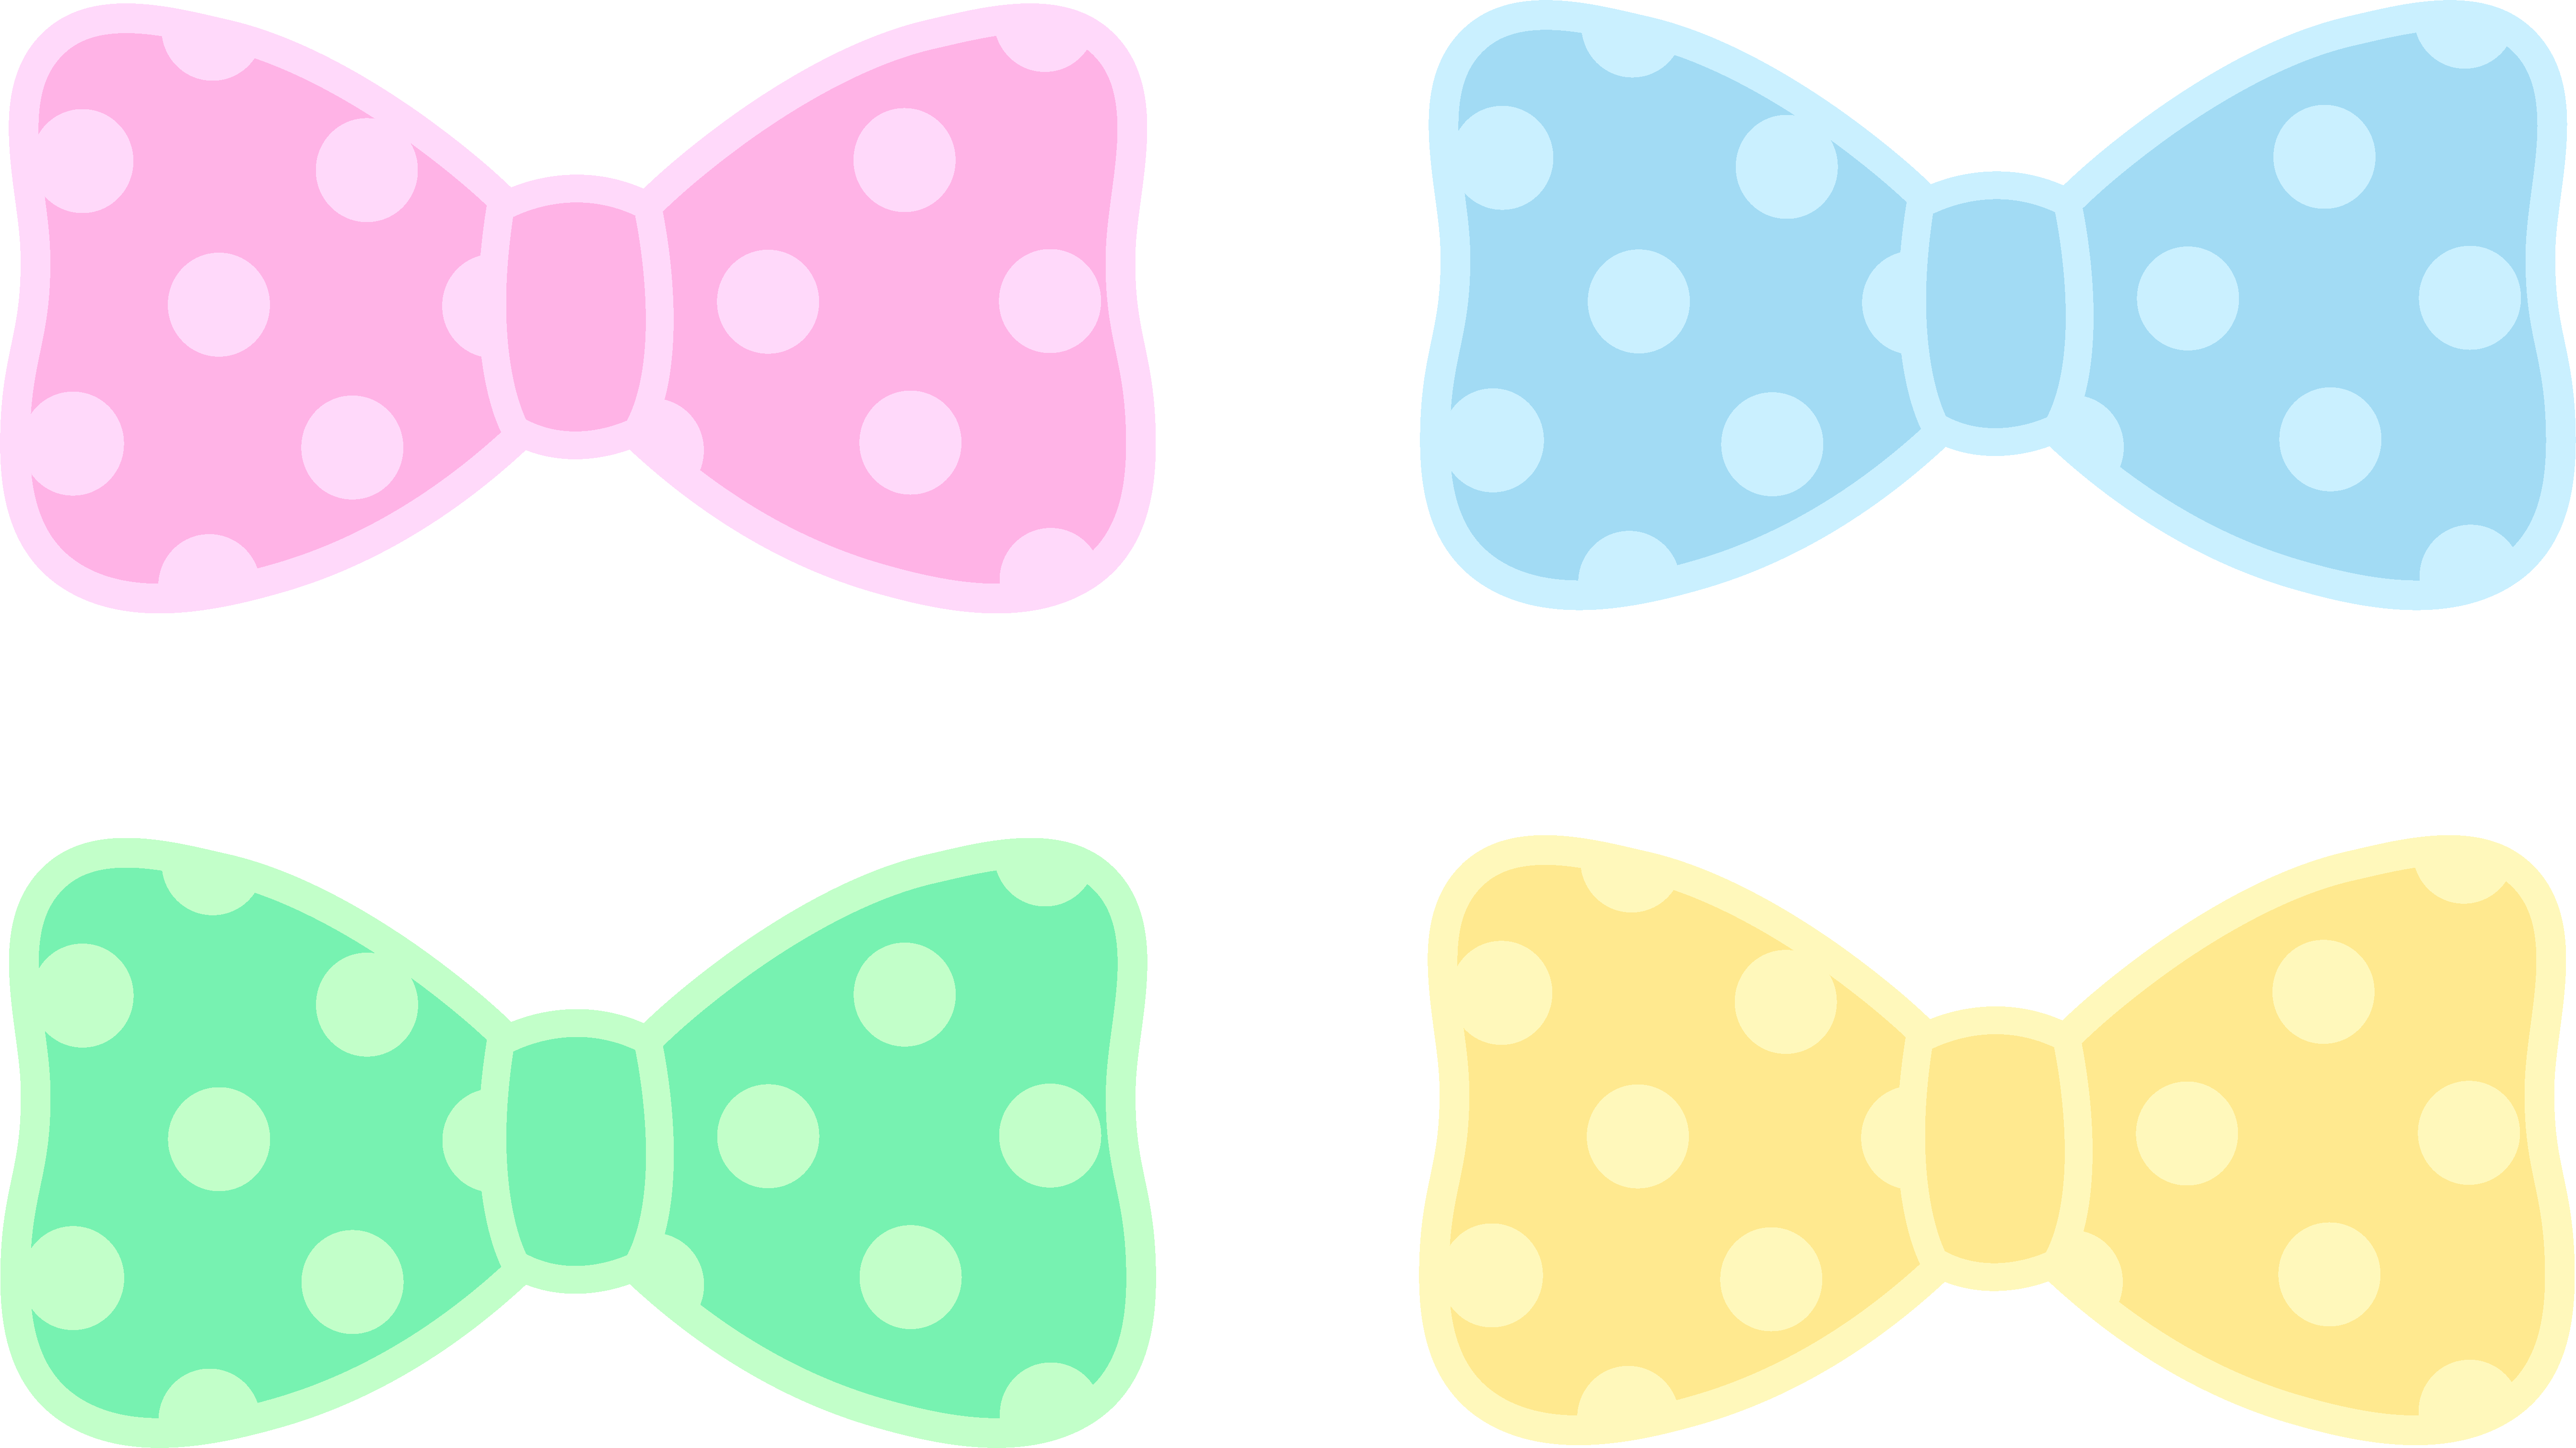 Dot at getdrawings com. Record clipart pattern